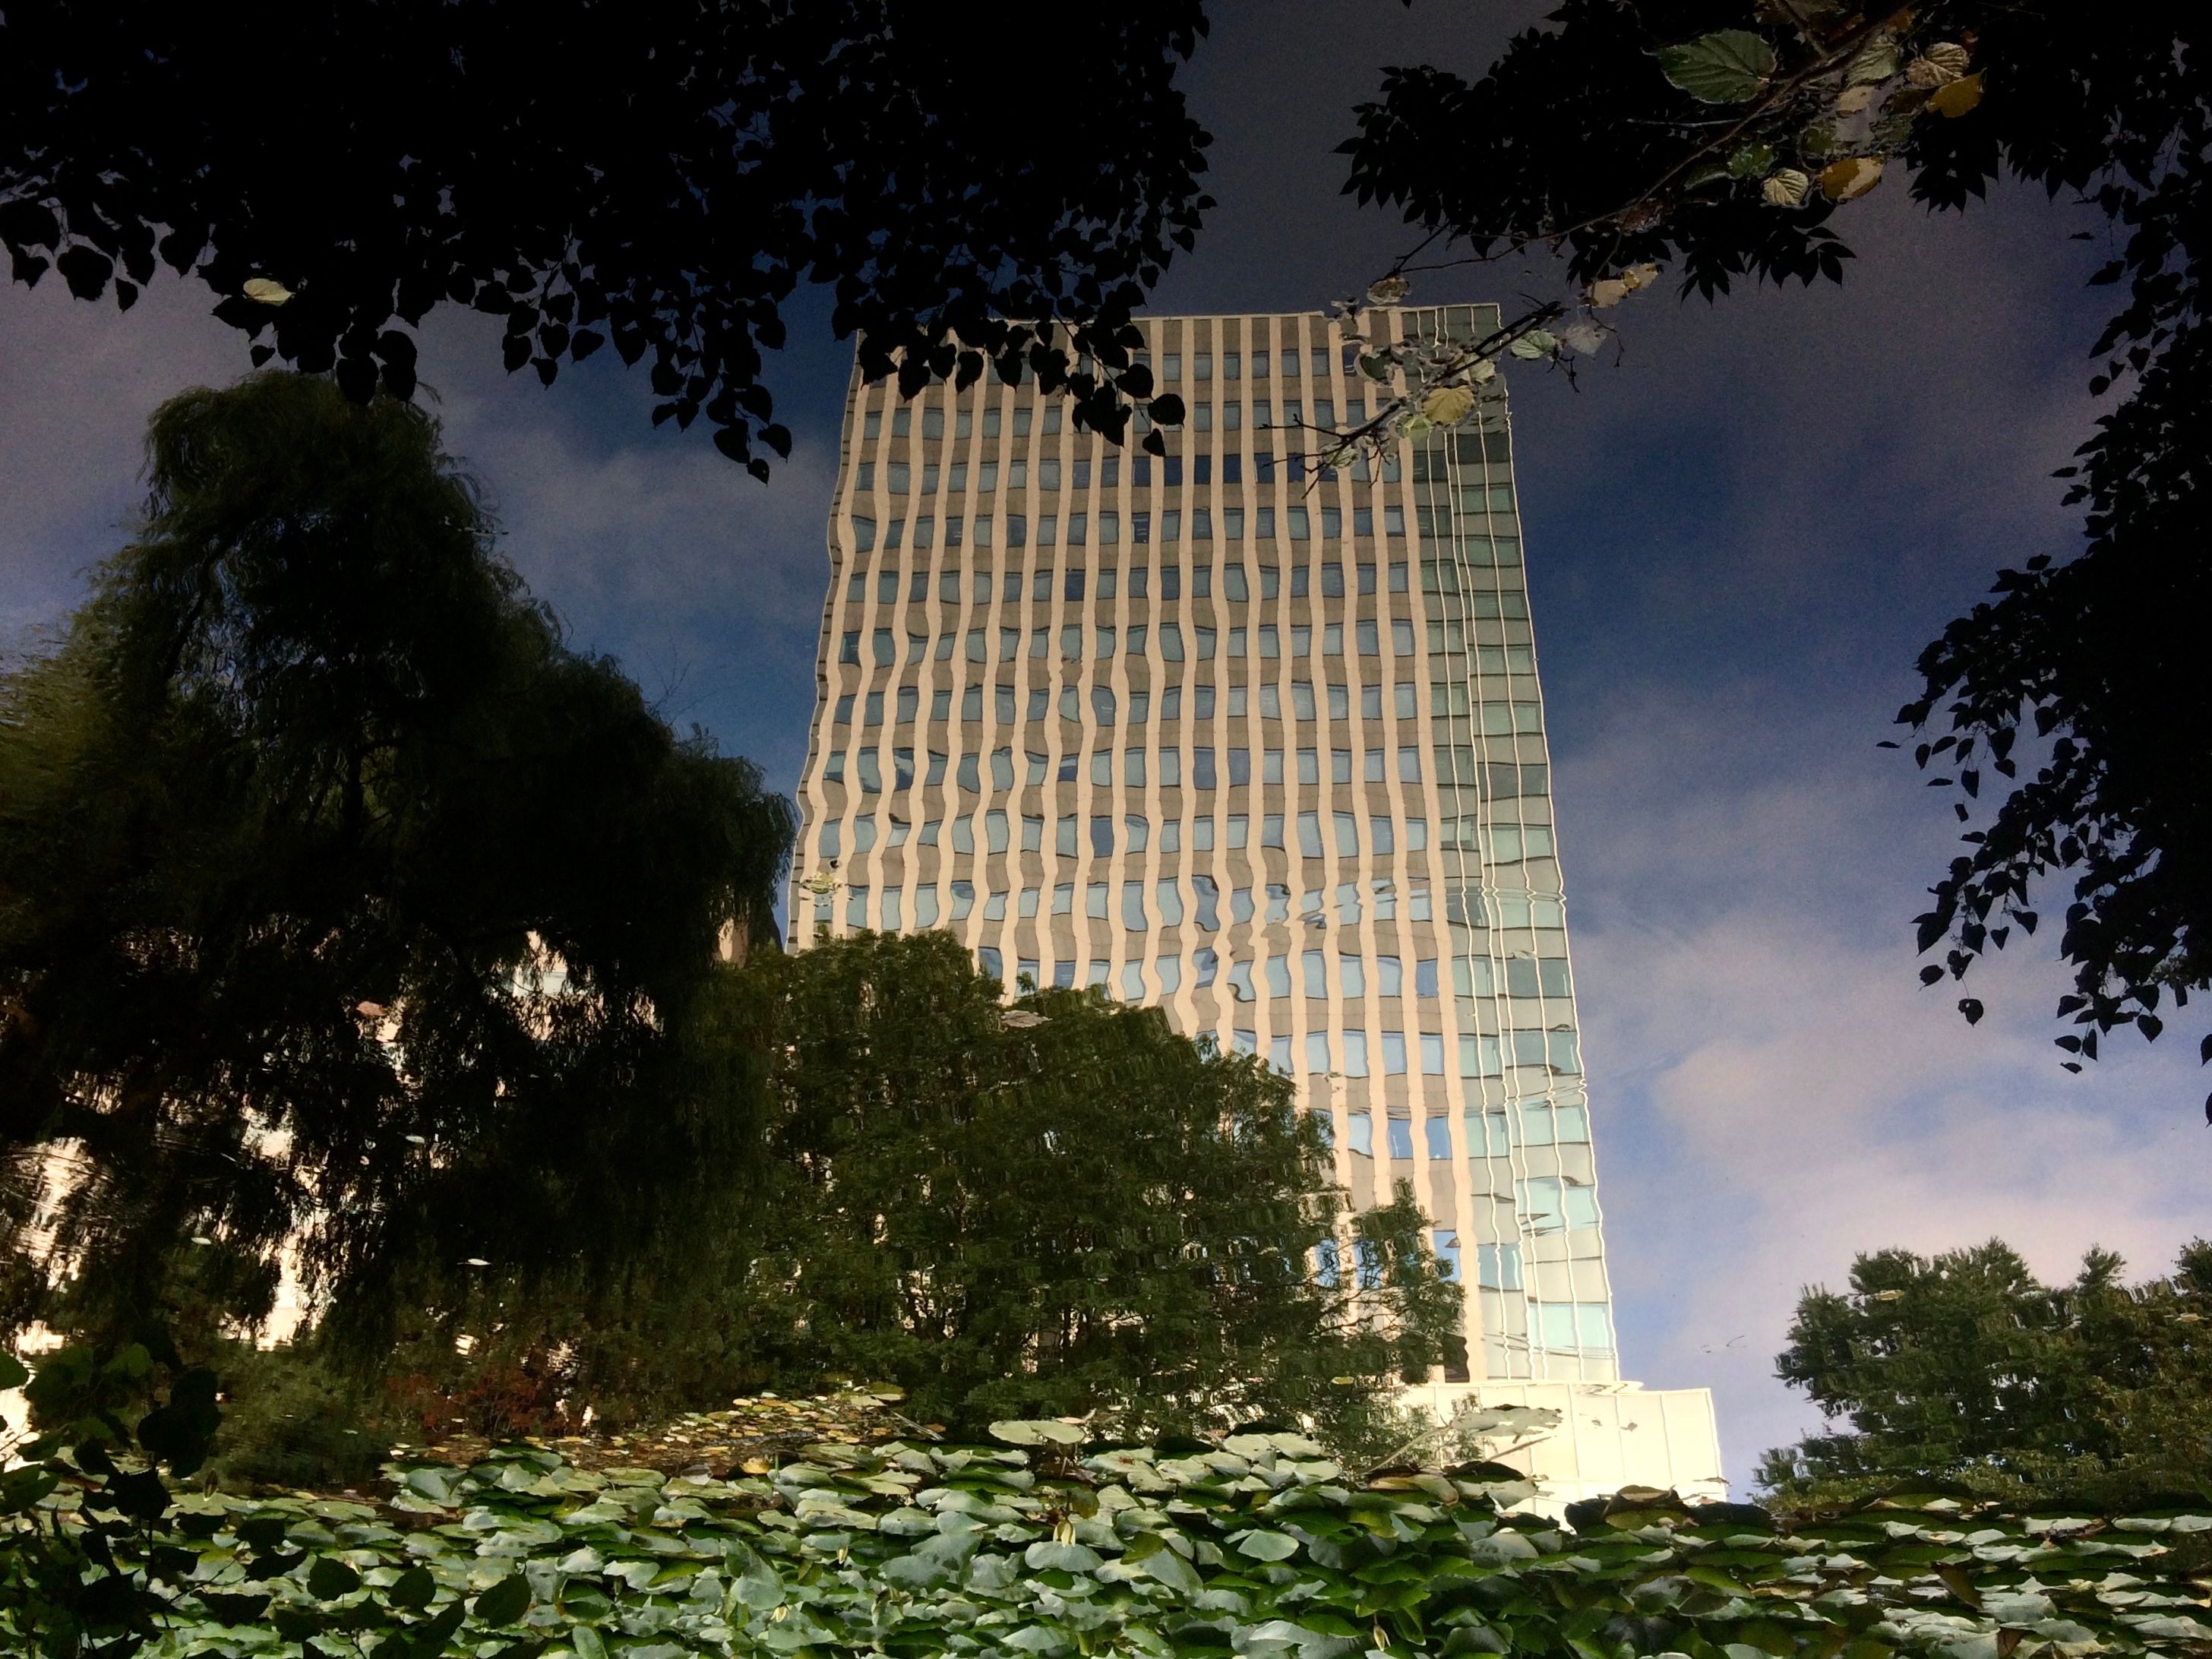 The reflection of an office building in a pond.